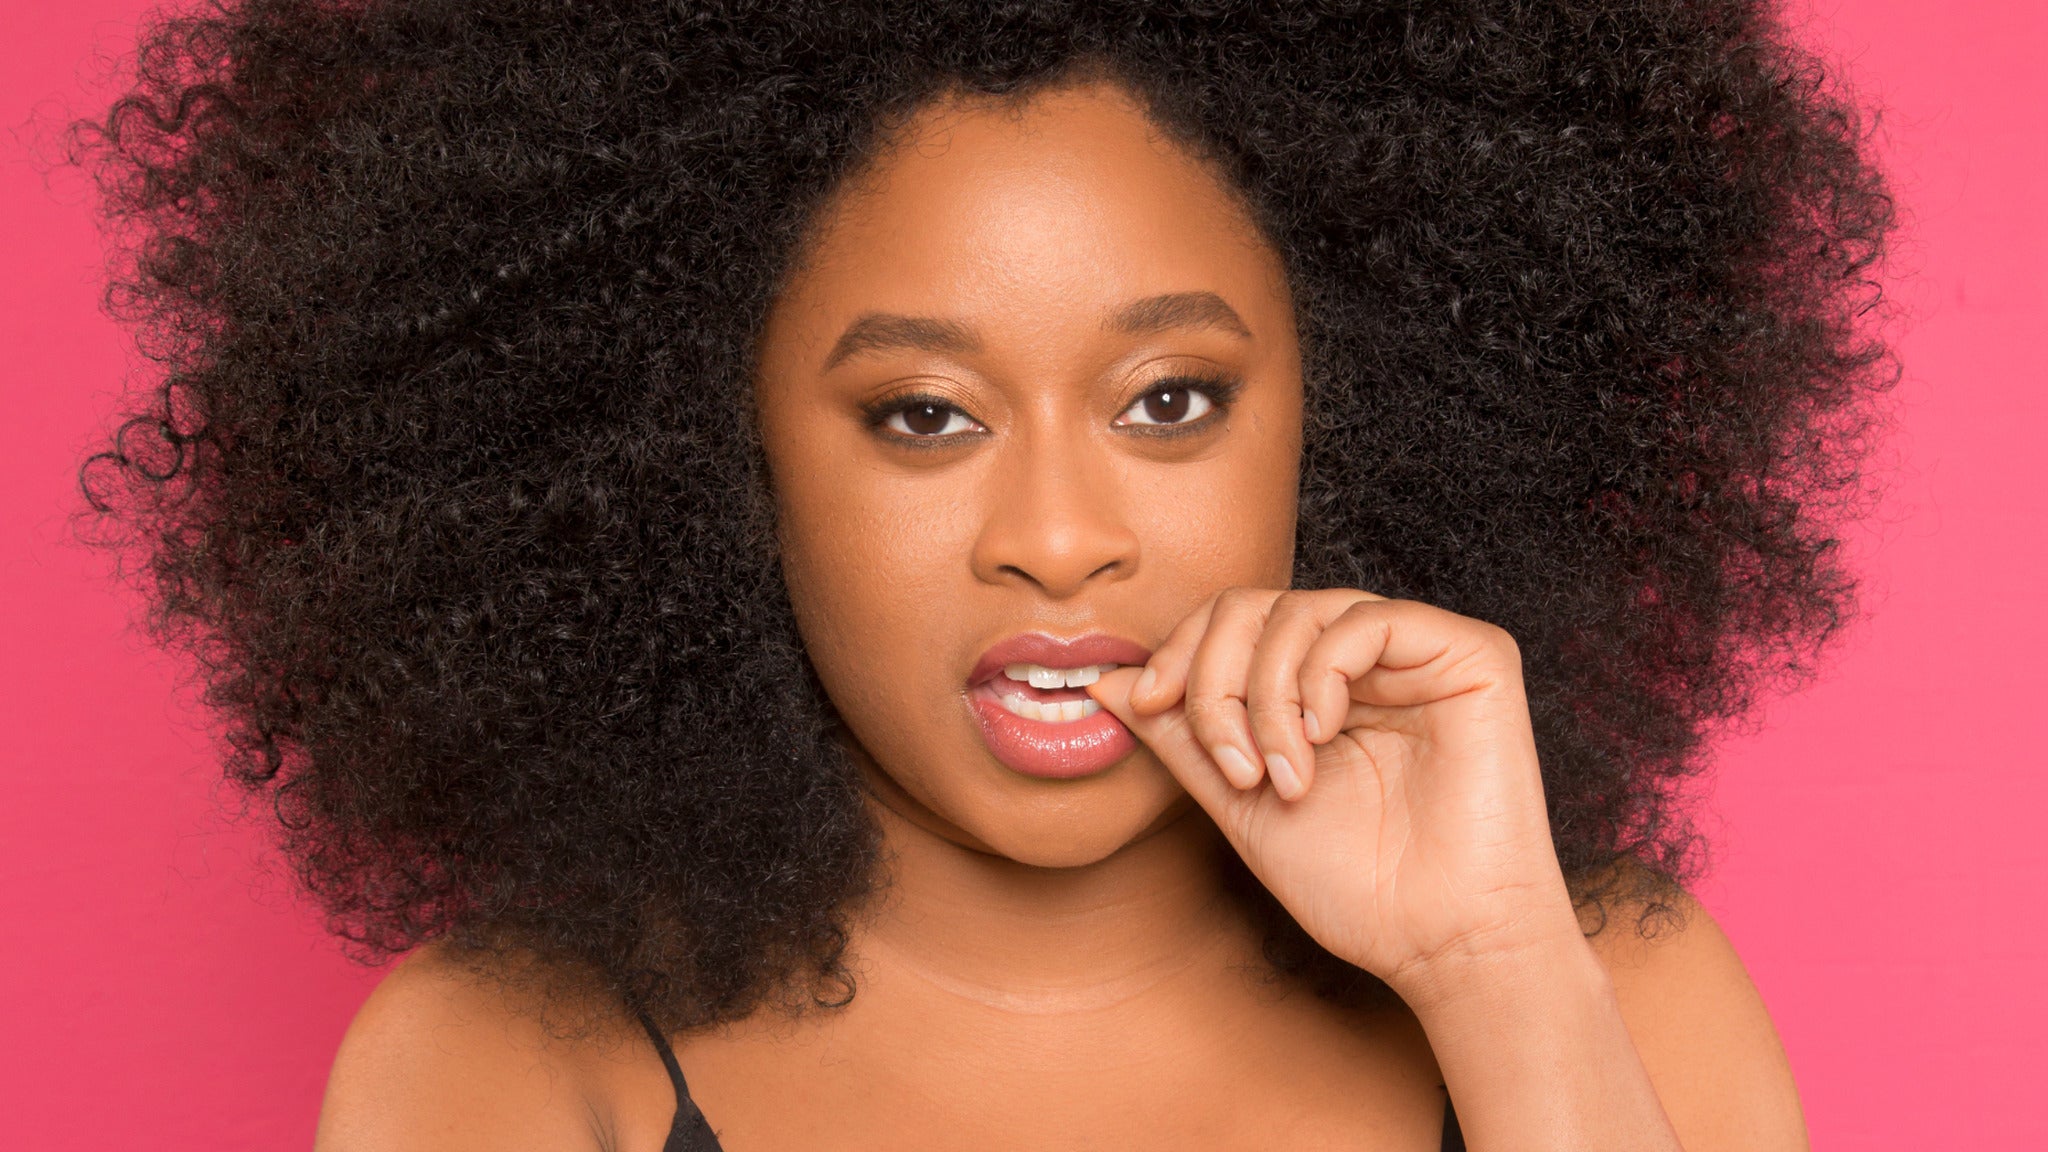 Phoebe Robinson presale code for real tickets in Houston